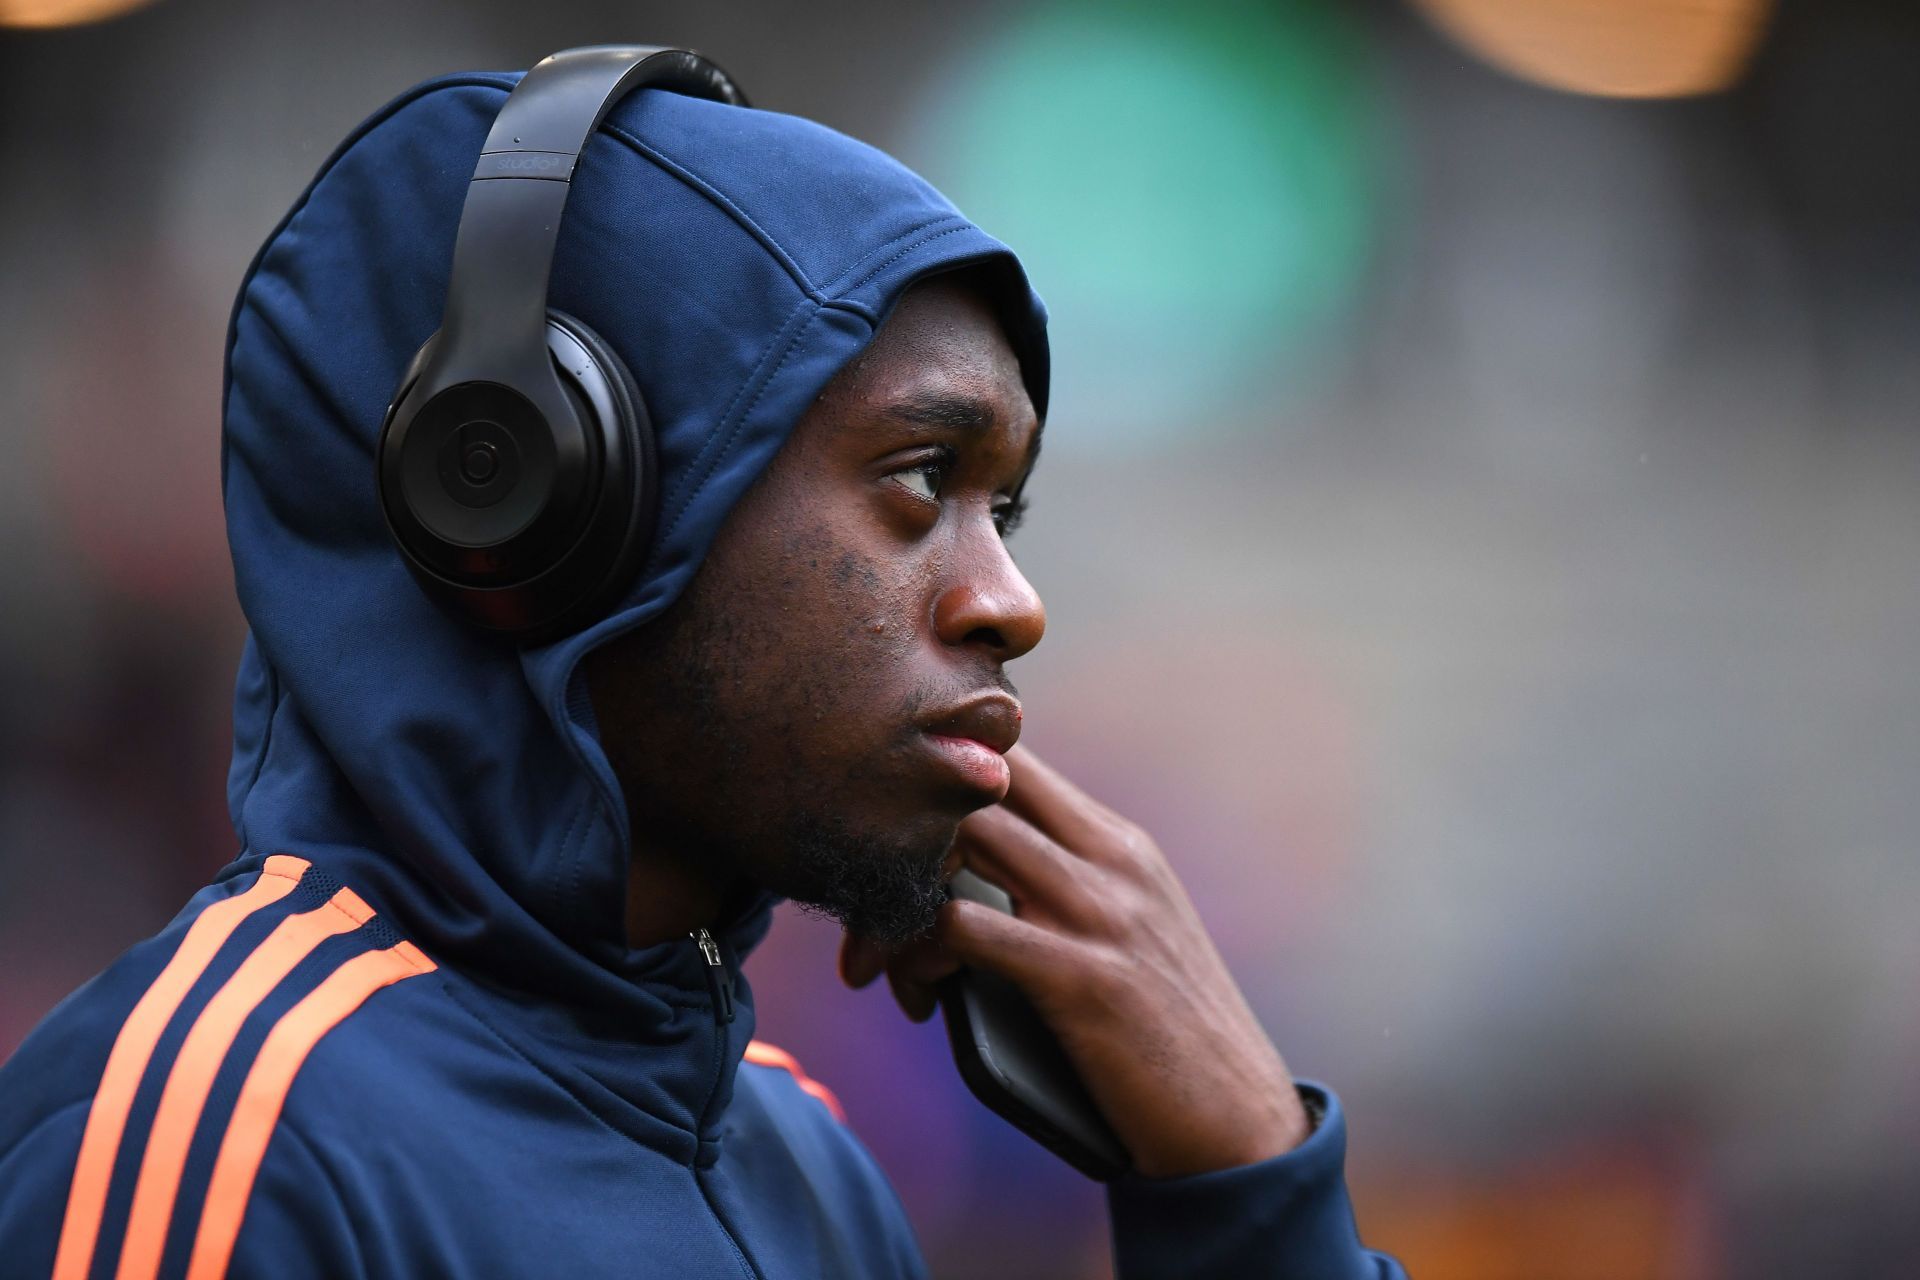 Aaron Wan-Bissaka has been linked with a move away from Old Trafford.